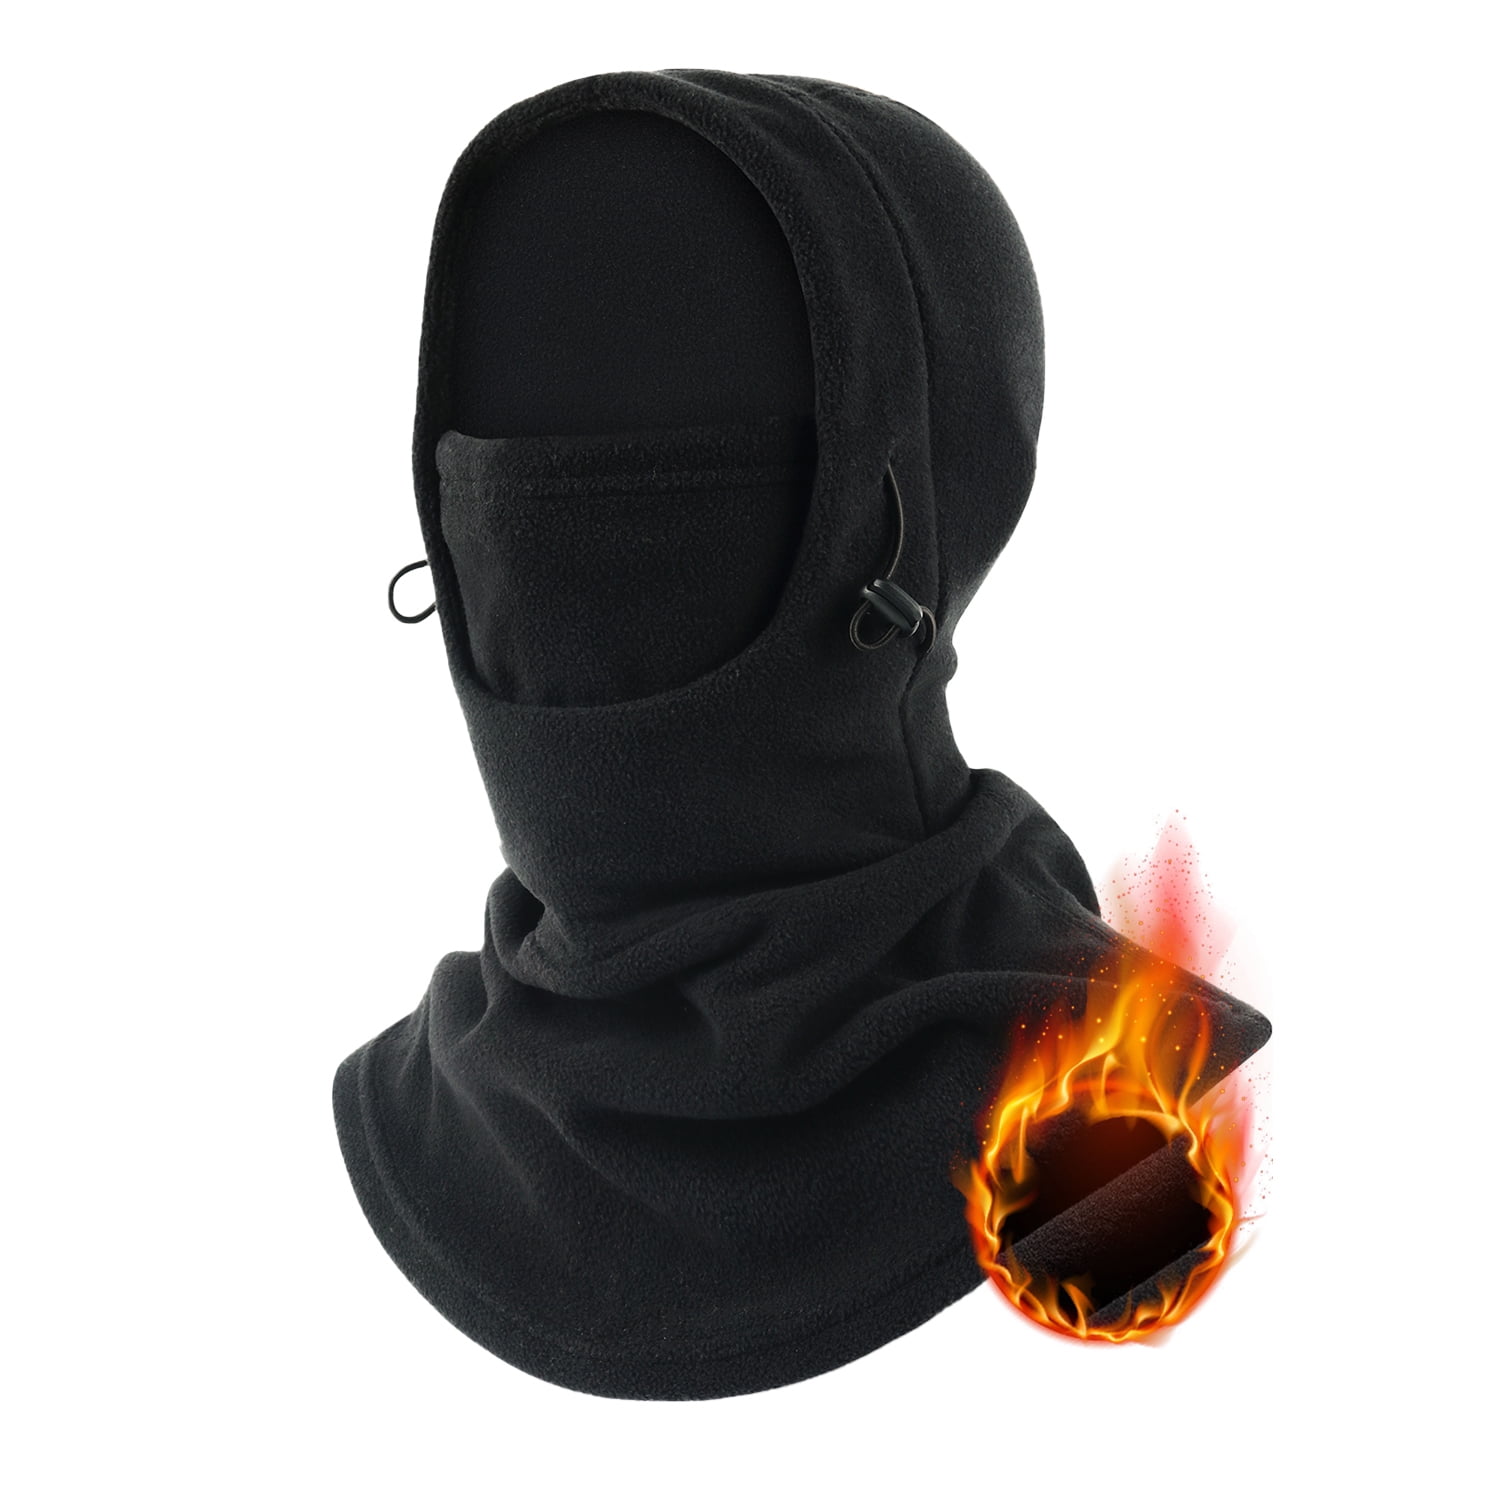 Balaclava Face Covering for Cold Weather Ski Mask for Men Women with ...